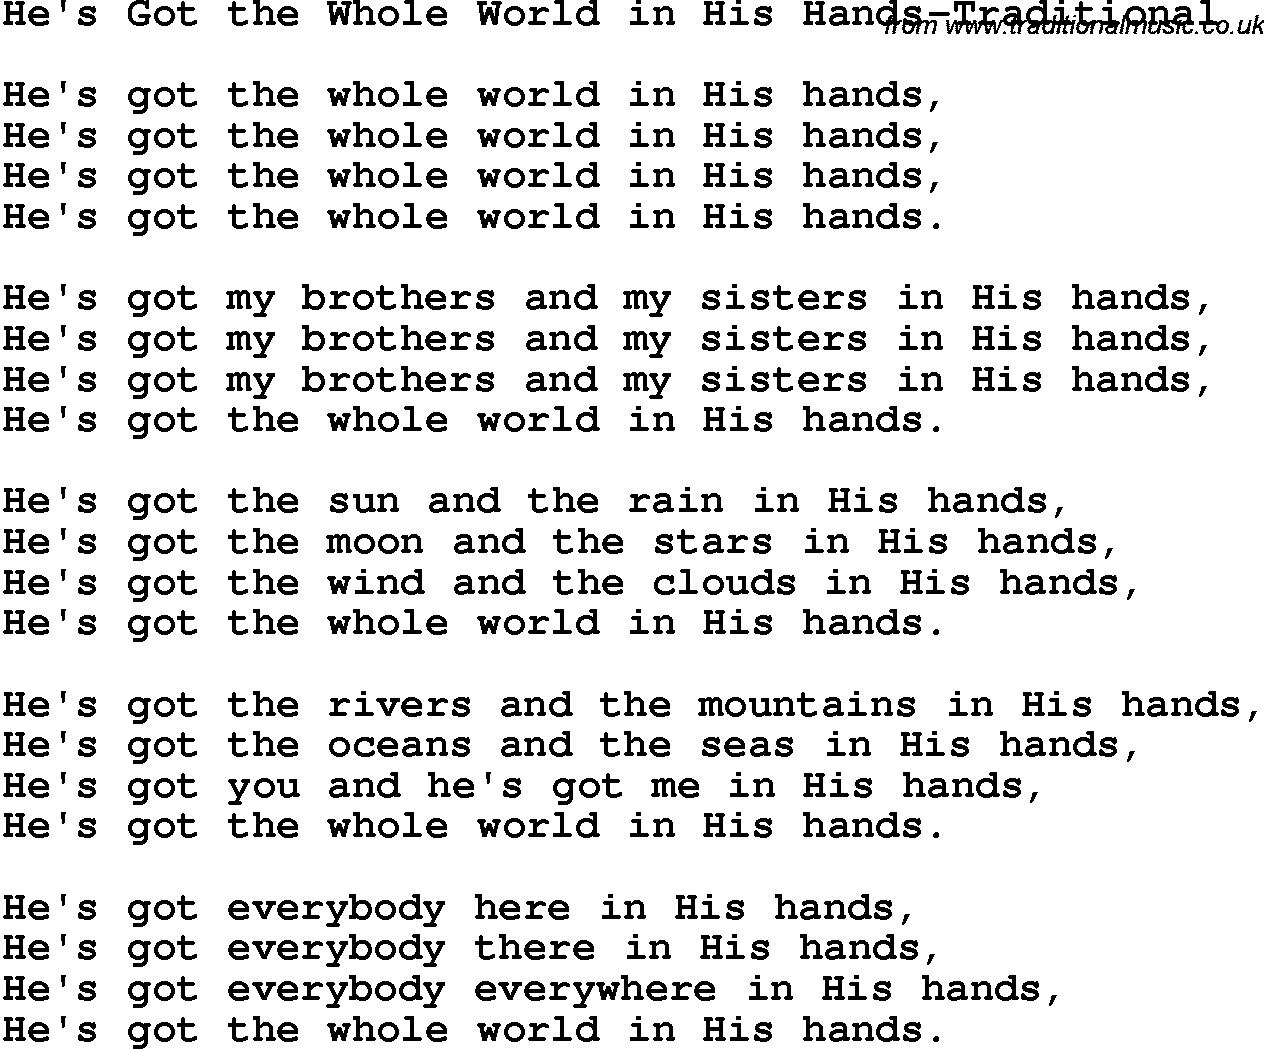 Christian Chlidrens Song He's Got The Whole World In His Hands-Traditional Lyrics